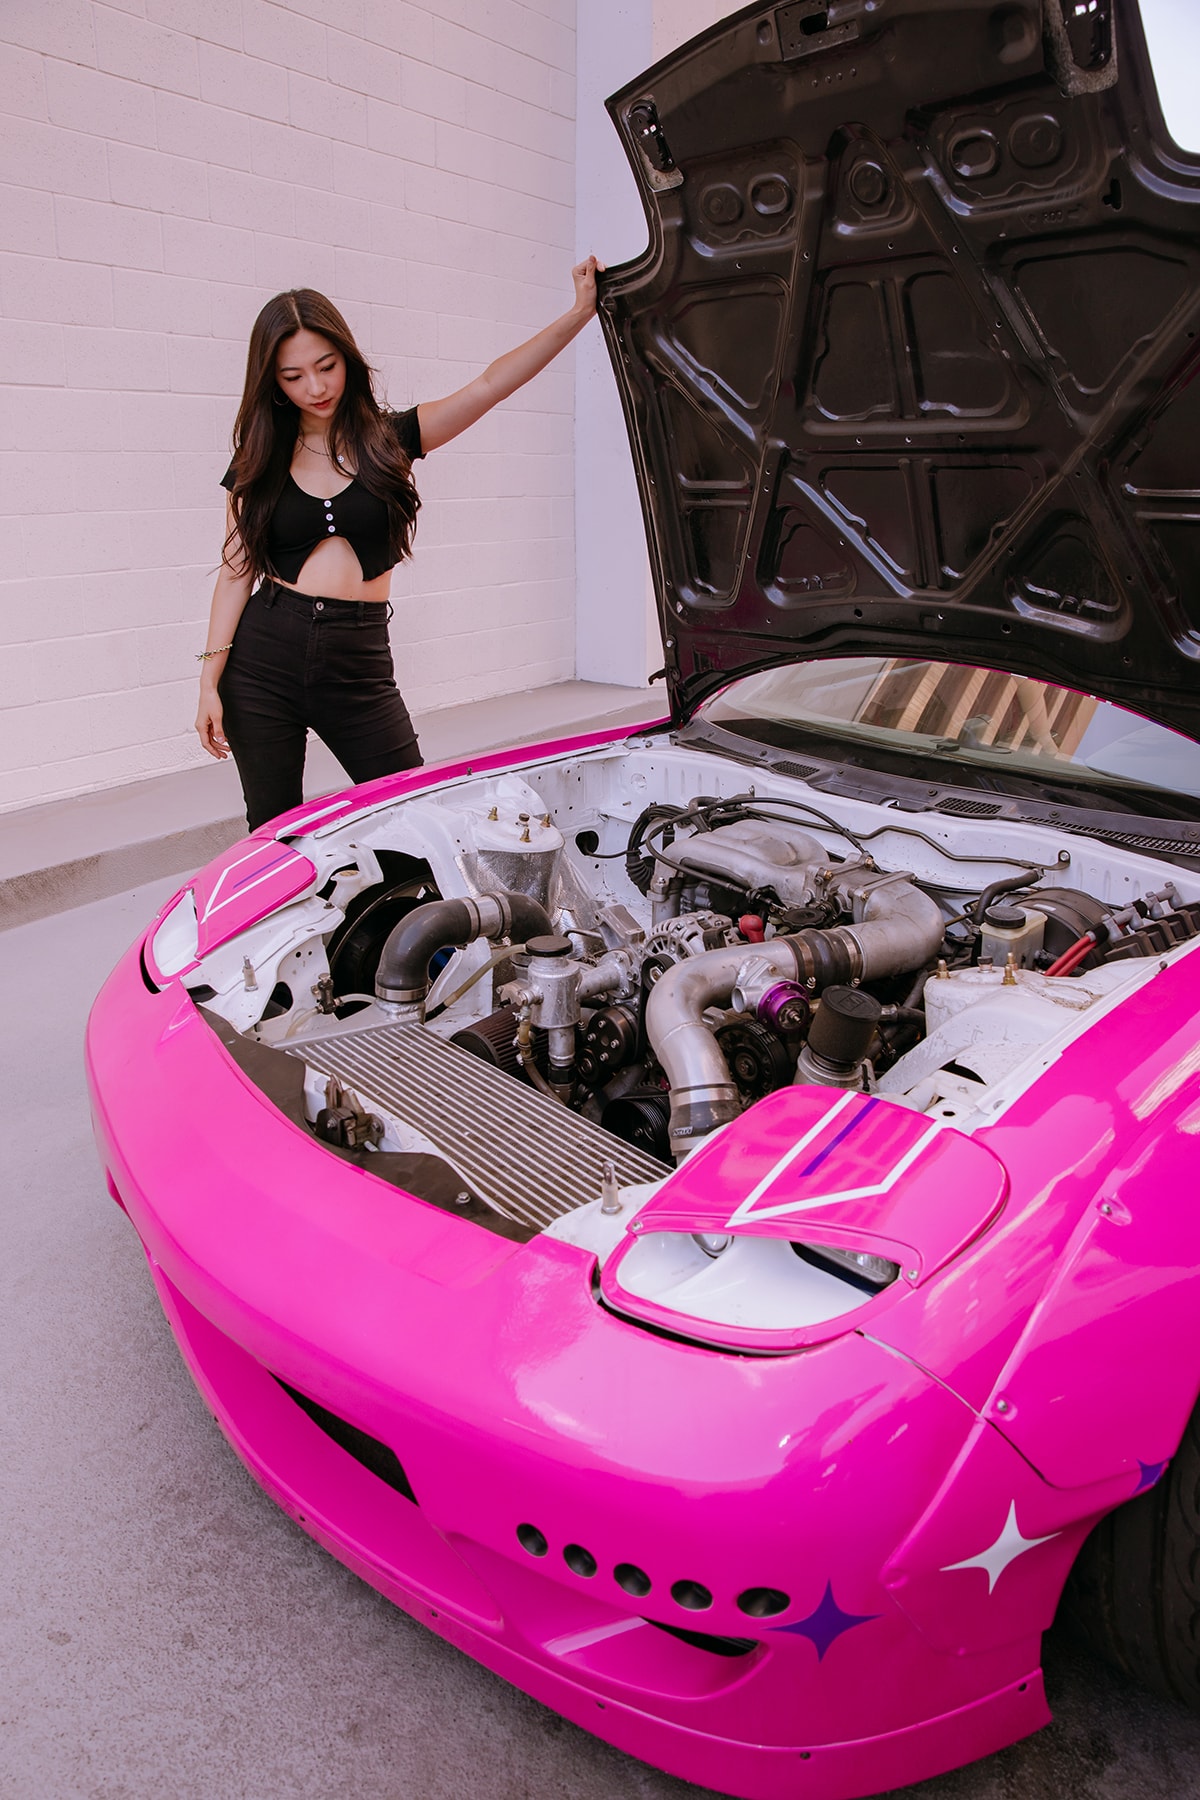 Toyota-Powered Mazda RX-7 FD Is No Parking Lot Princess, It's a No